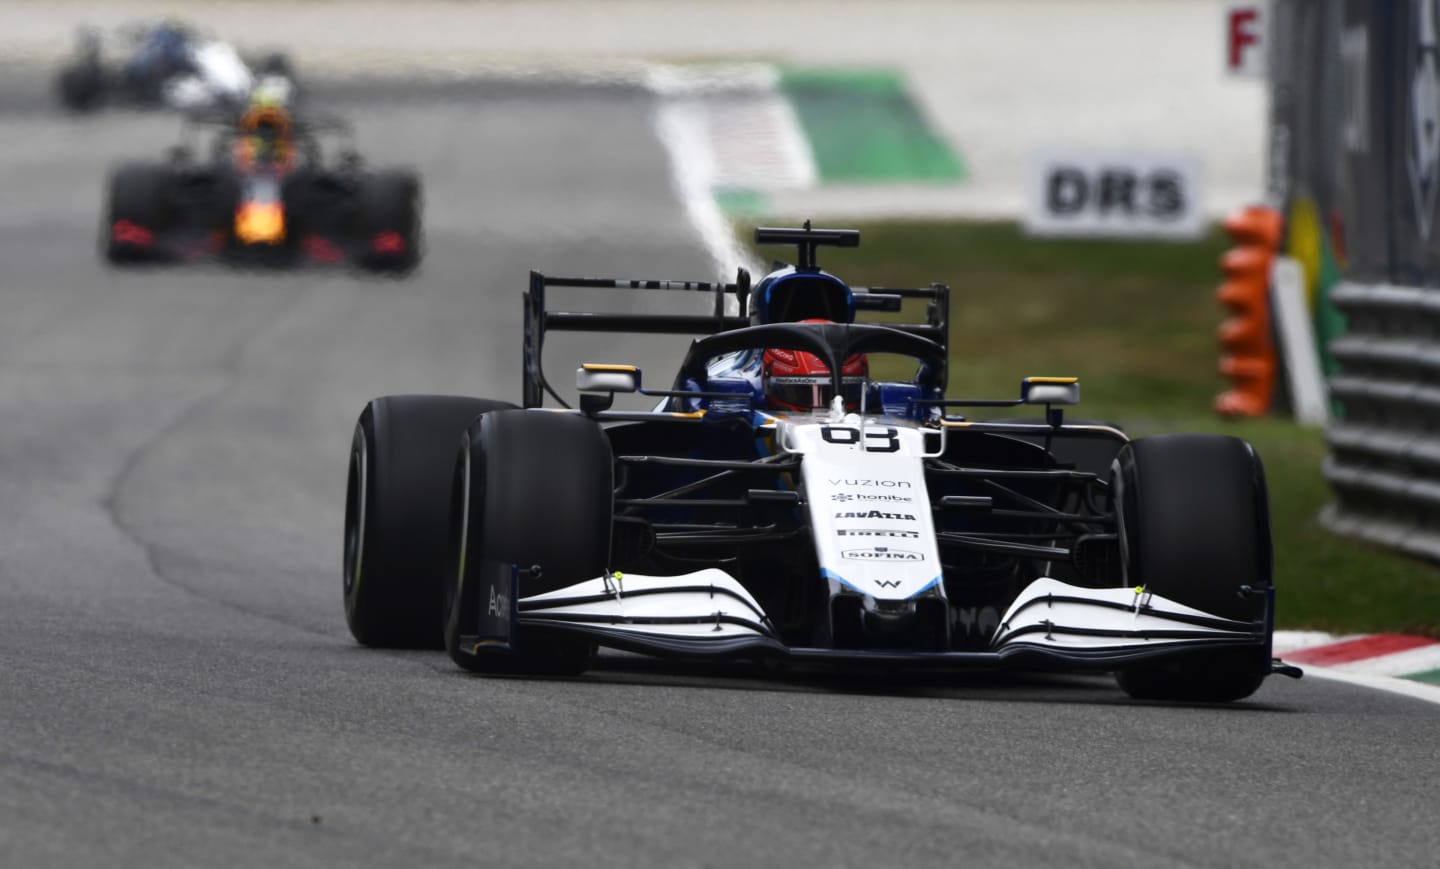 MONZA, ITALY - SEPTEMBER 10: George Russell of Great Britain driving the (63) Williams Racing FW43B Mercedes during practice ahead of the F1 Grand Prix of Italy at Autodromo di Monza on September 10, 2021 in Monza, Italy. (Photo by Rudy Carezzevoli/Getty Images)